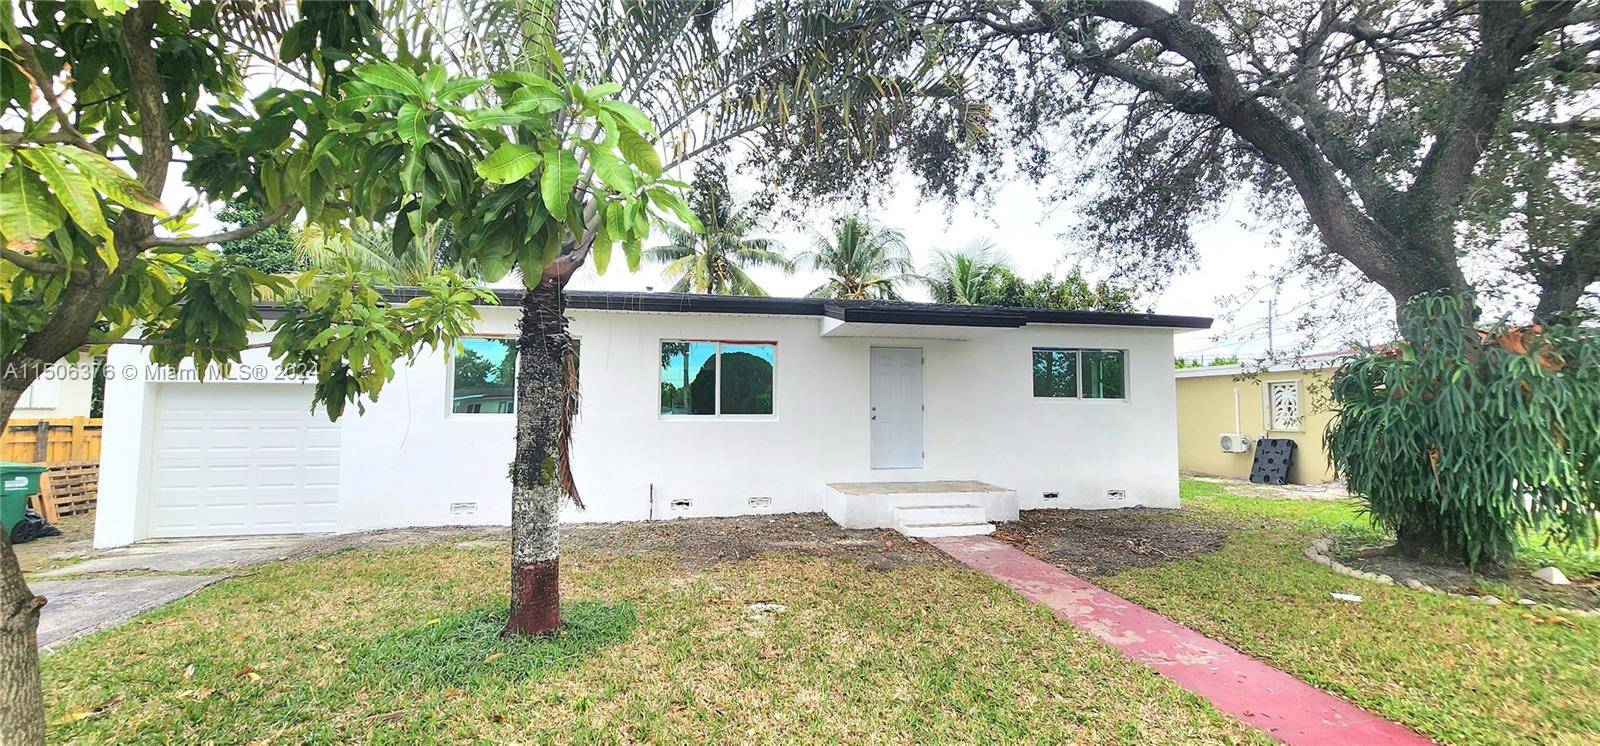 Completely remodeled property in one of the most coveted areas of Miami Gardens.